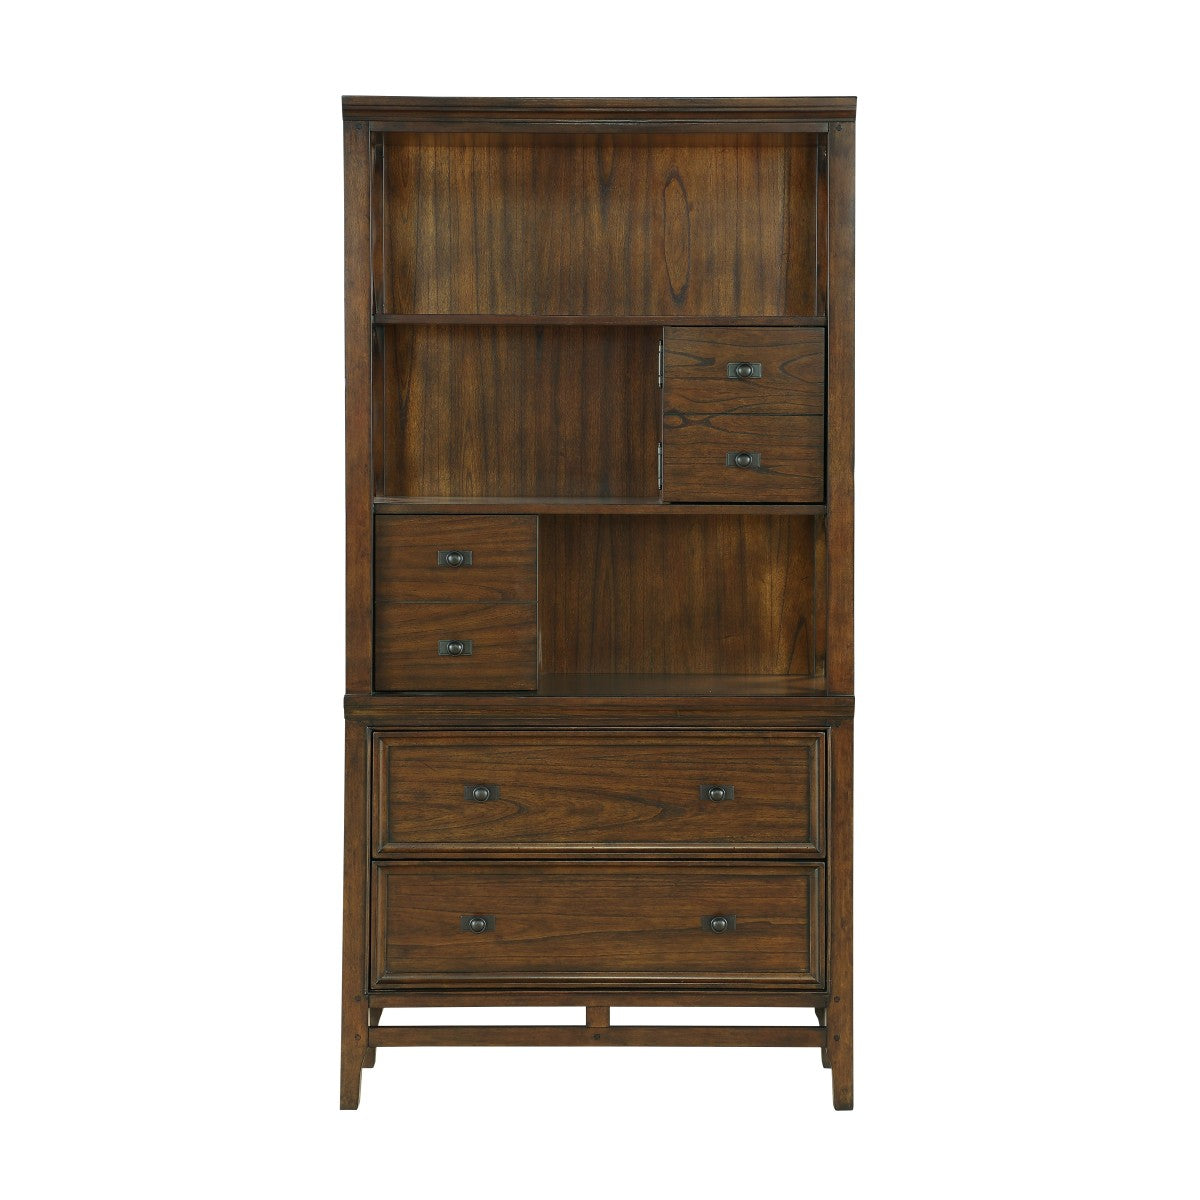 Frazier Park Brown Cherry Finish Traditional Mindy Veneer, Wood And Engineered Wood Bookcase